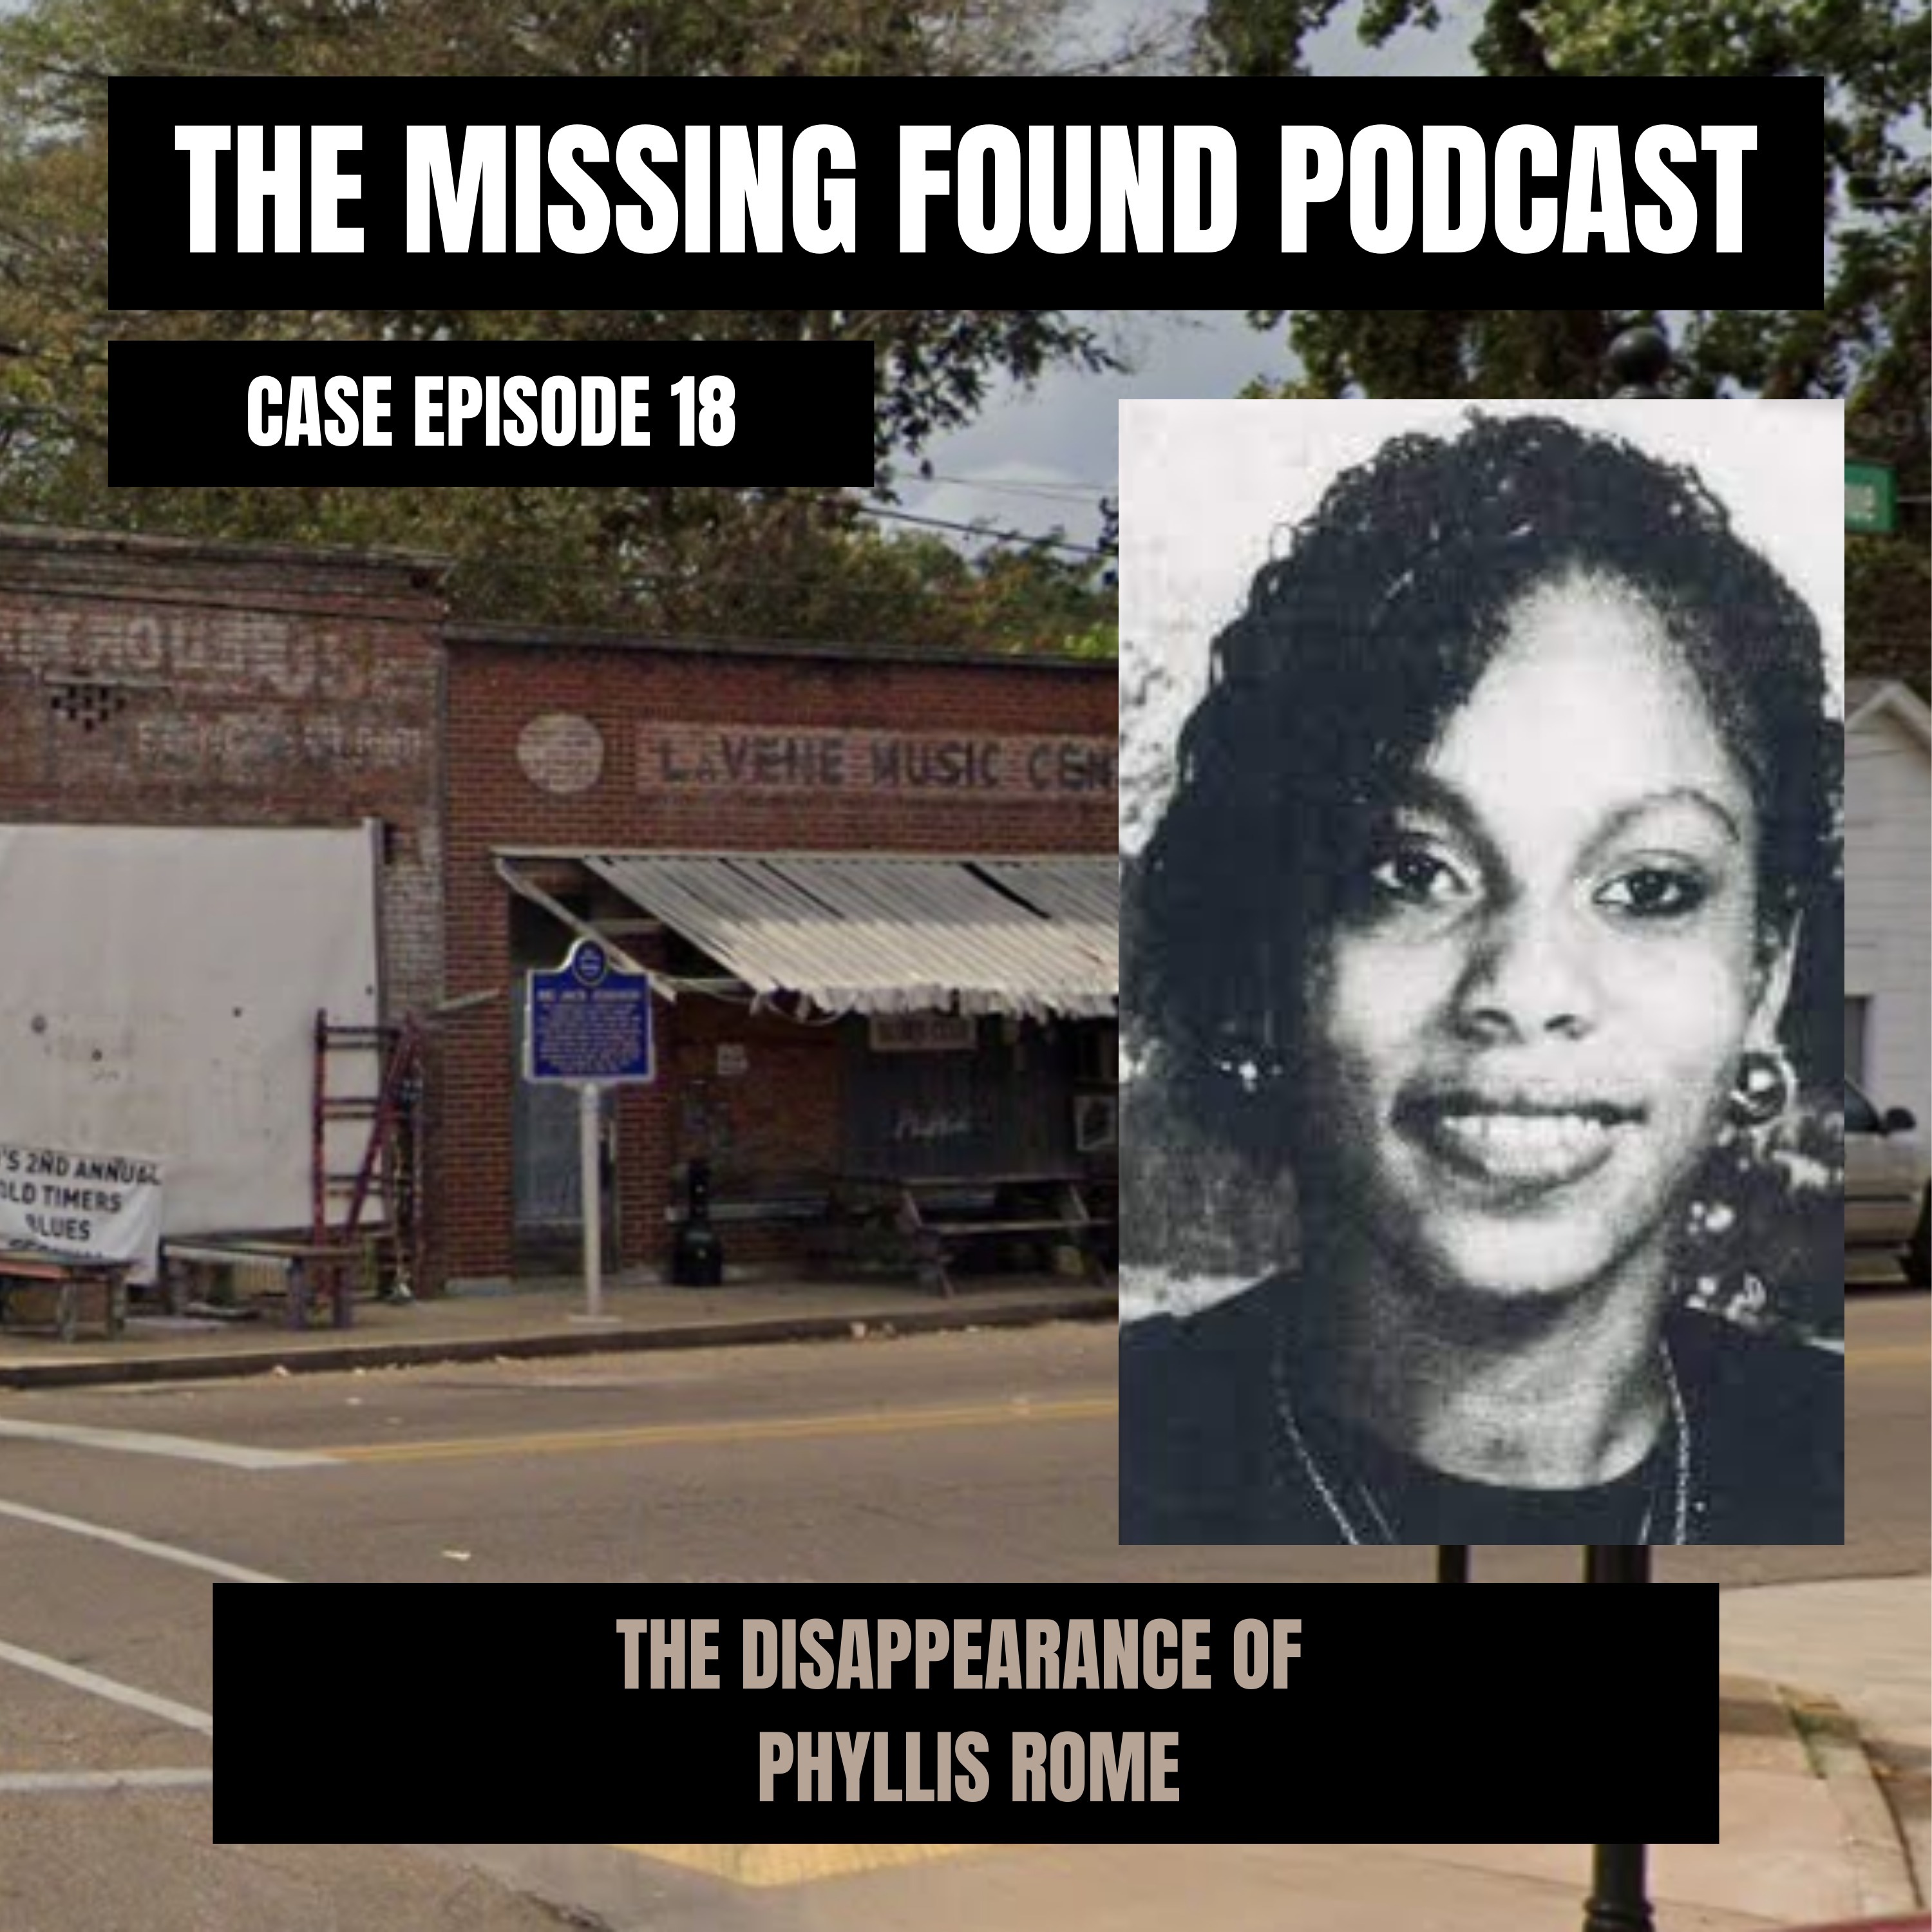 Case Episode 18 | Phyllis Rome: A Small Town Secret and 30 Years of Grim Mystery